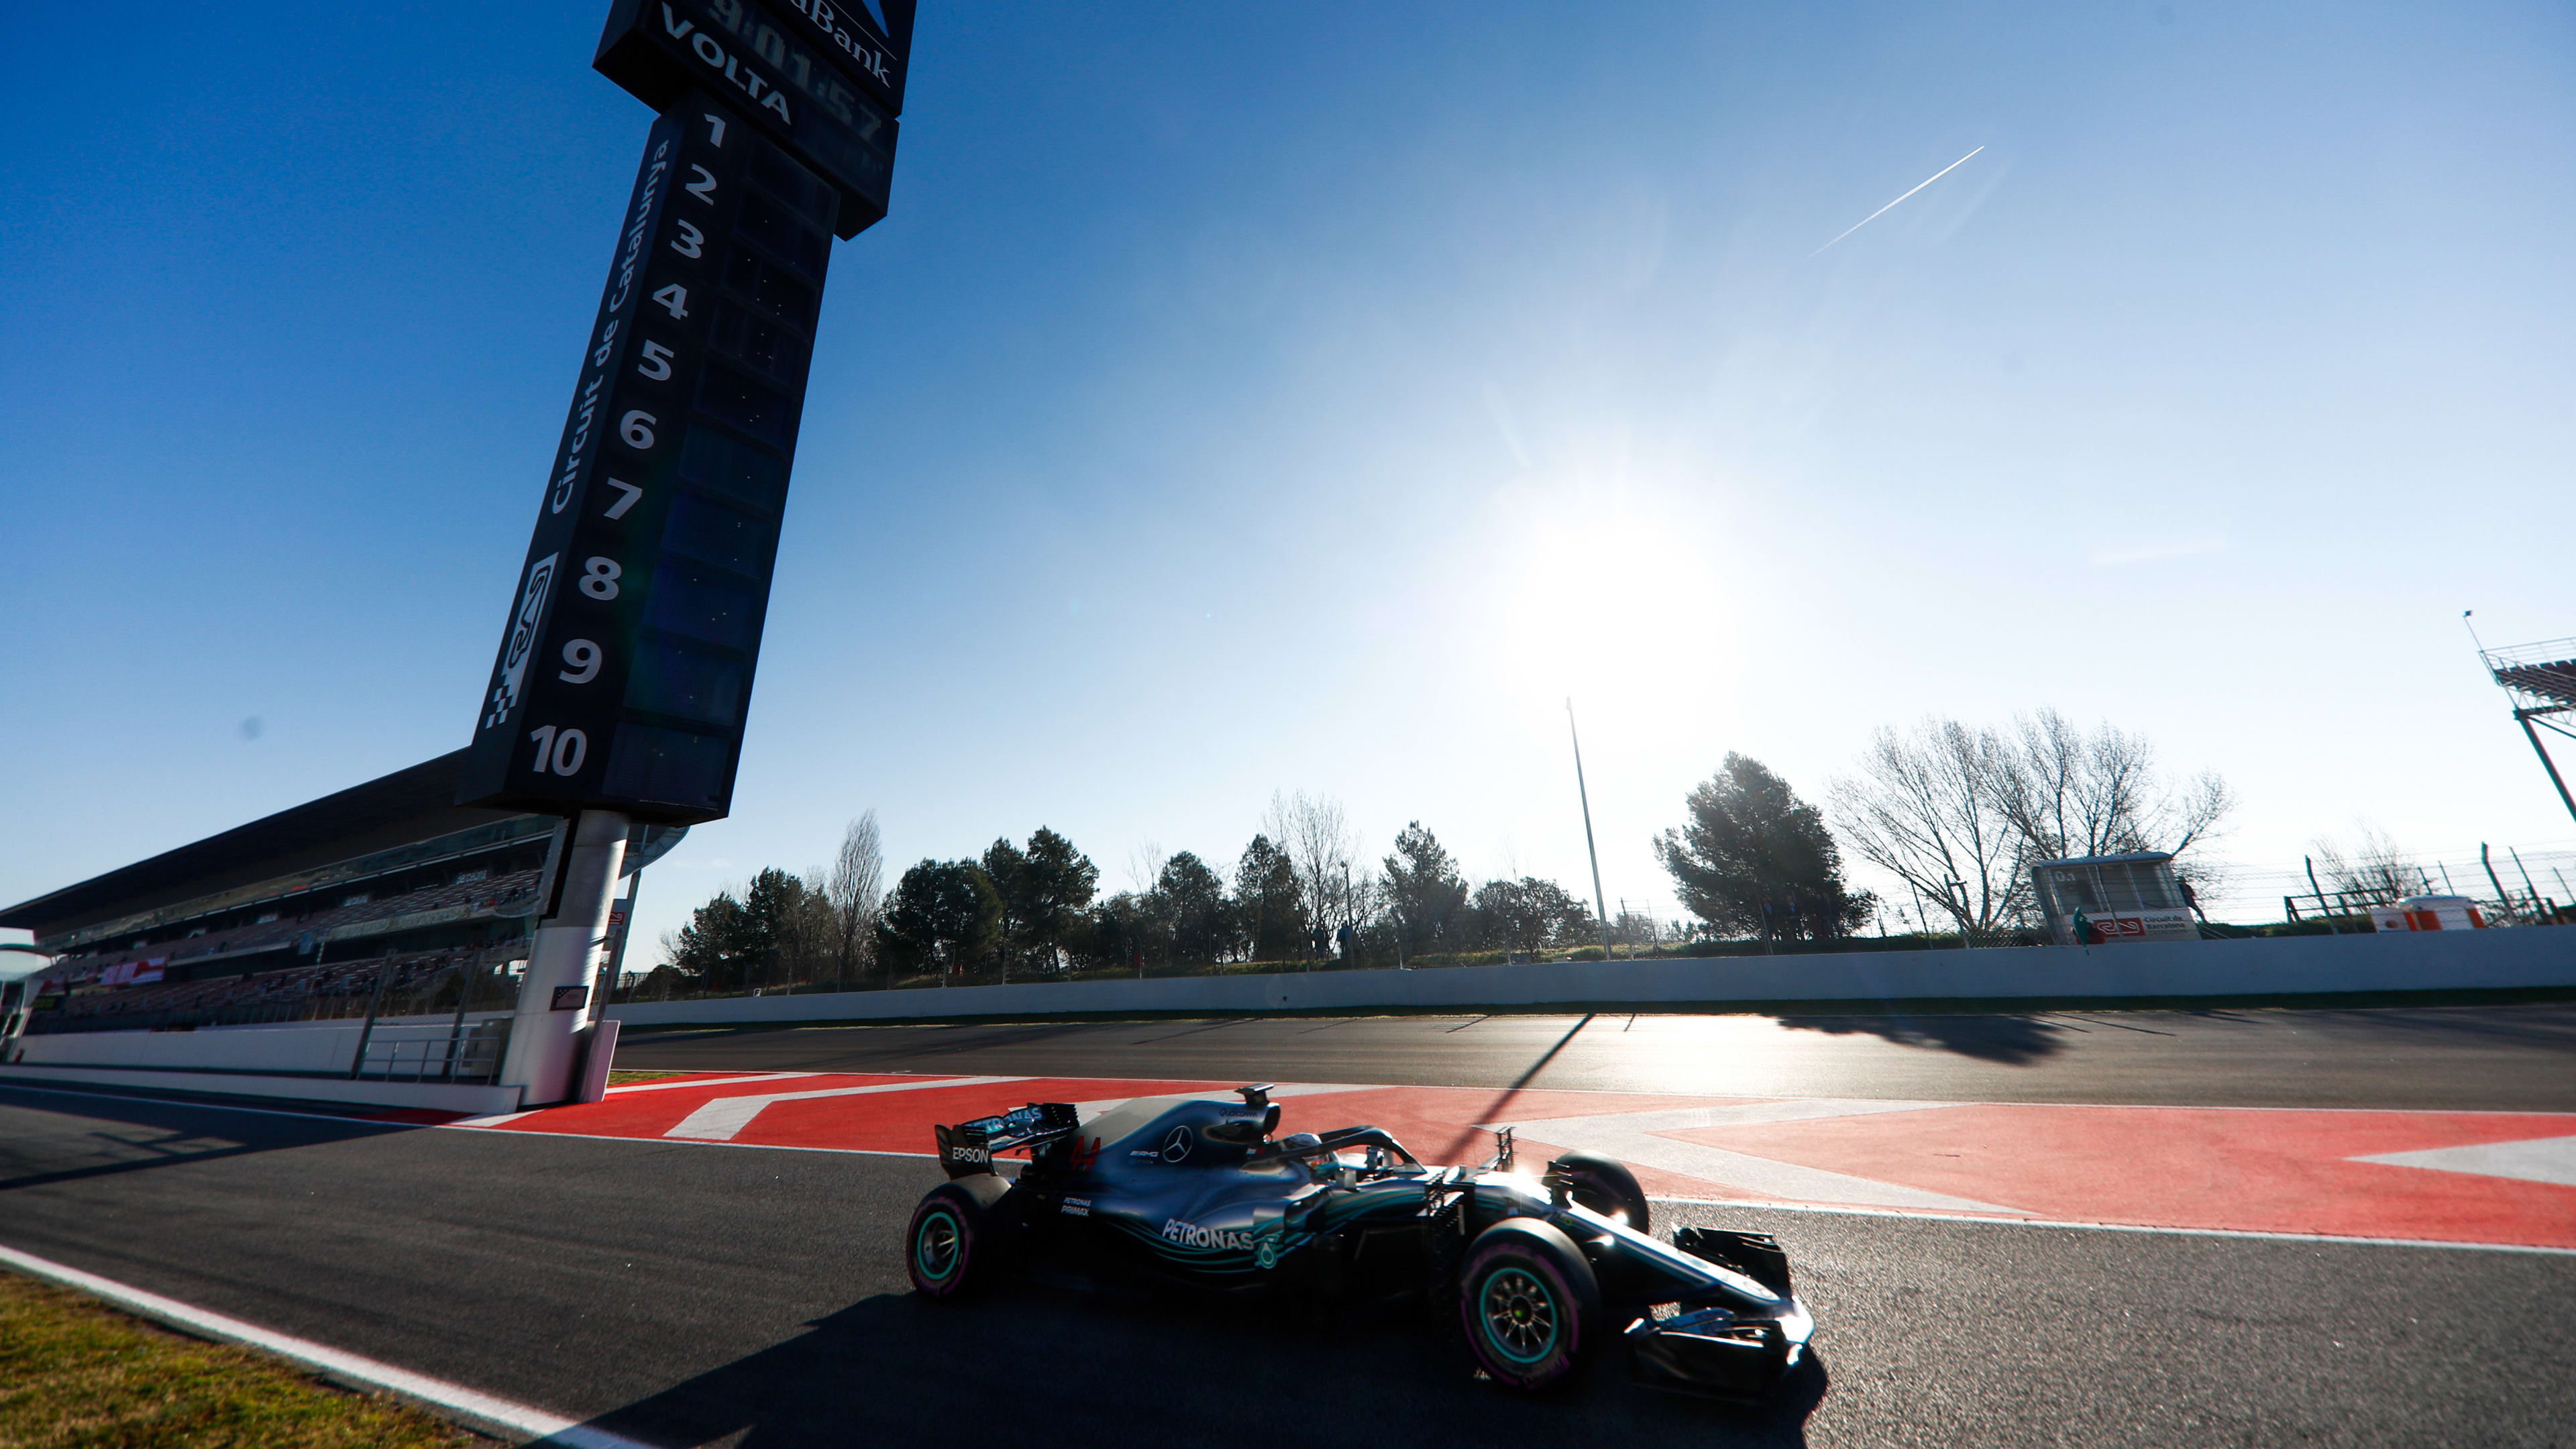 F1 testing 2019 7 things to watch out for during pre-season testing in Barcelona Formula 1®